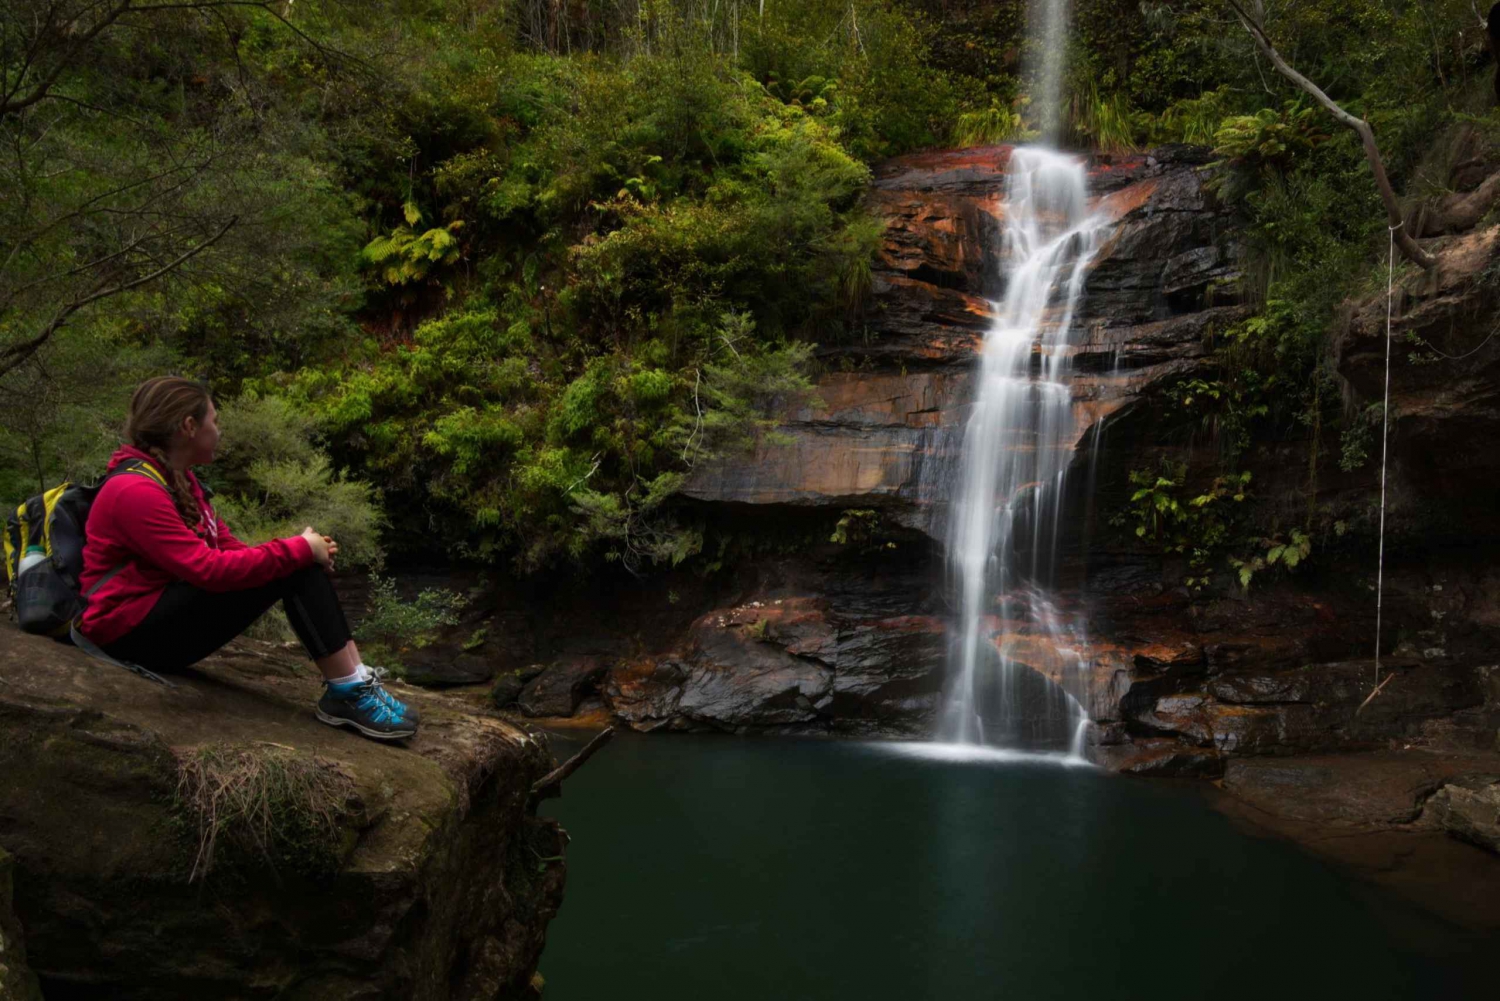 Sydney: Blue Mountains & Wildlife 4WD Tour with River Cruise